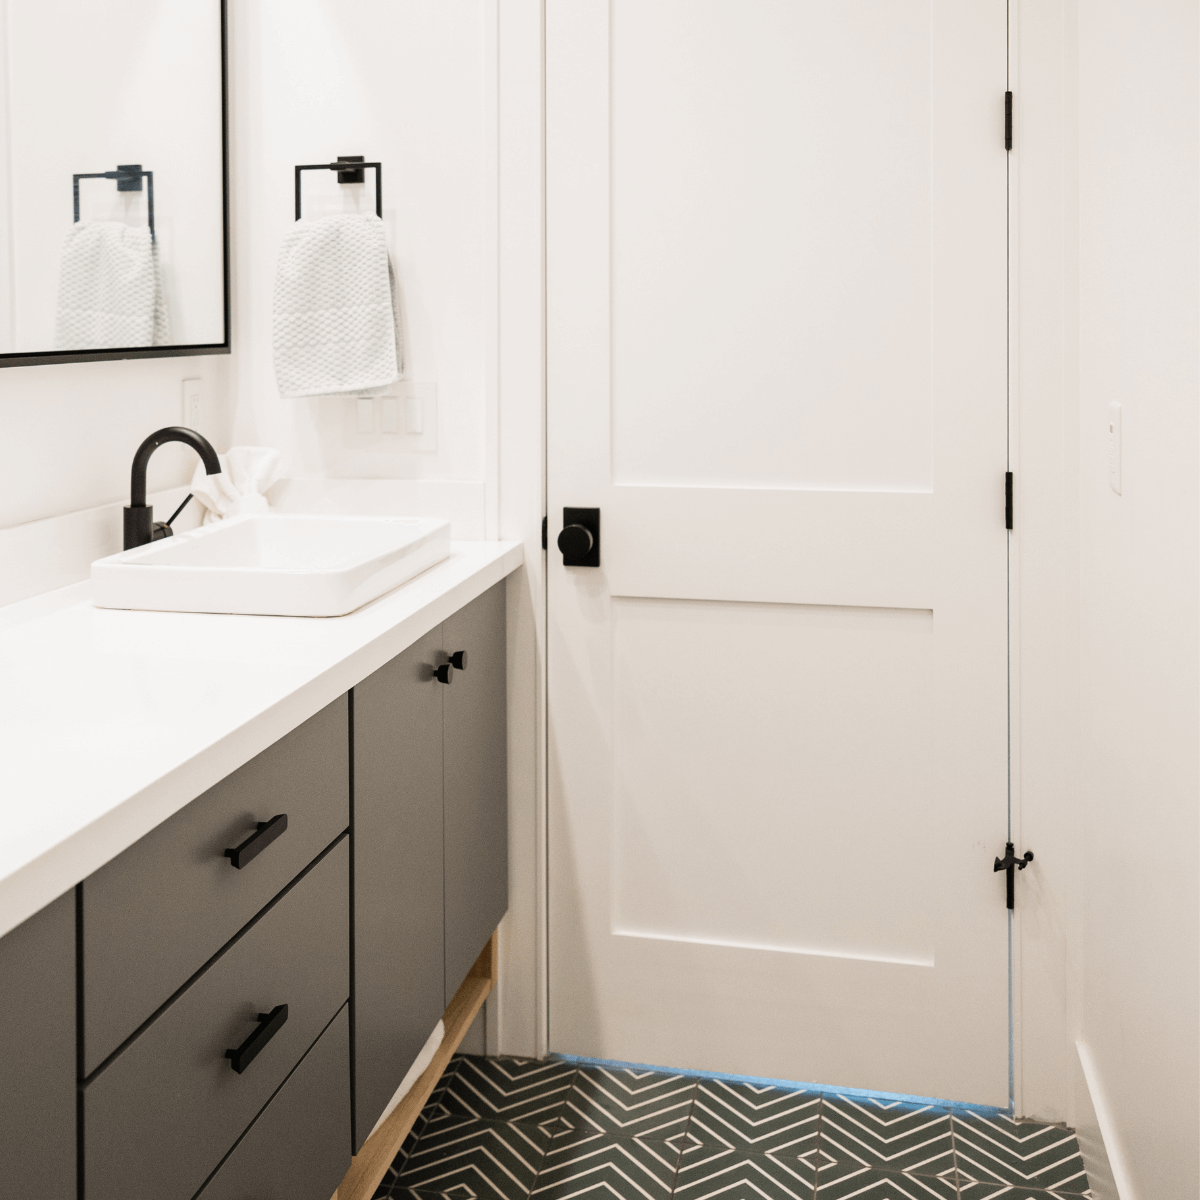 Bathrooms: What Type of Doors Should You Use?